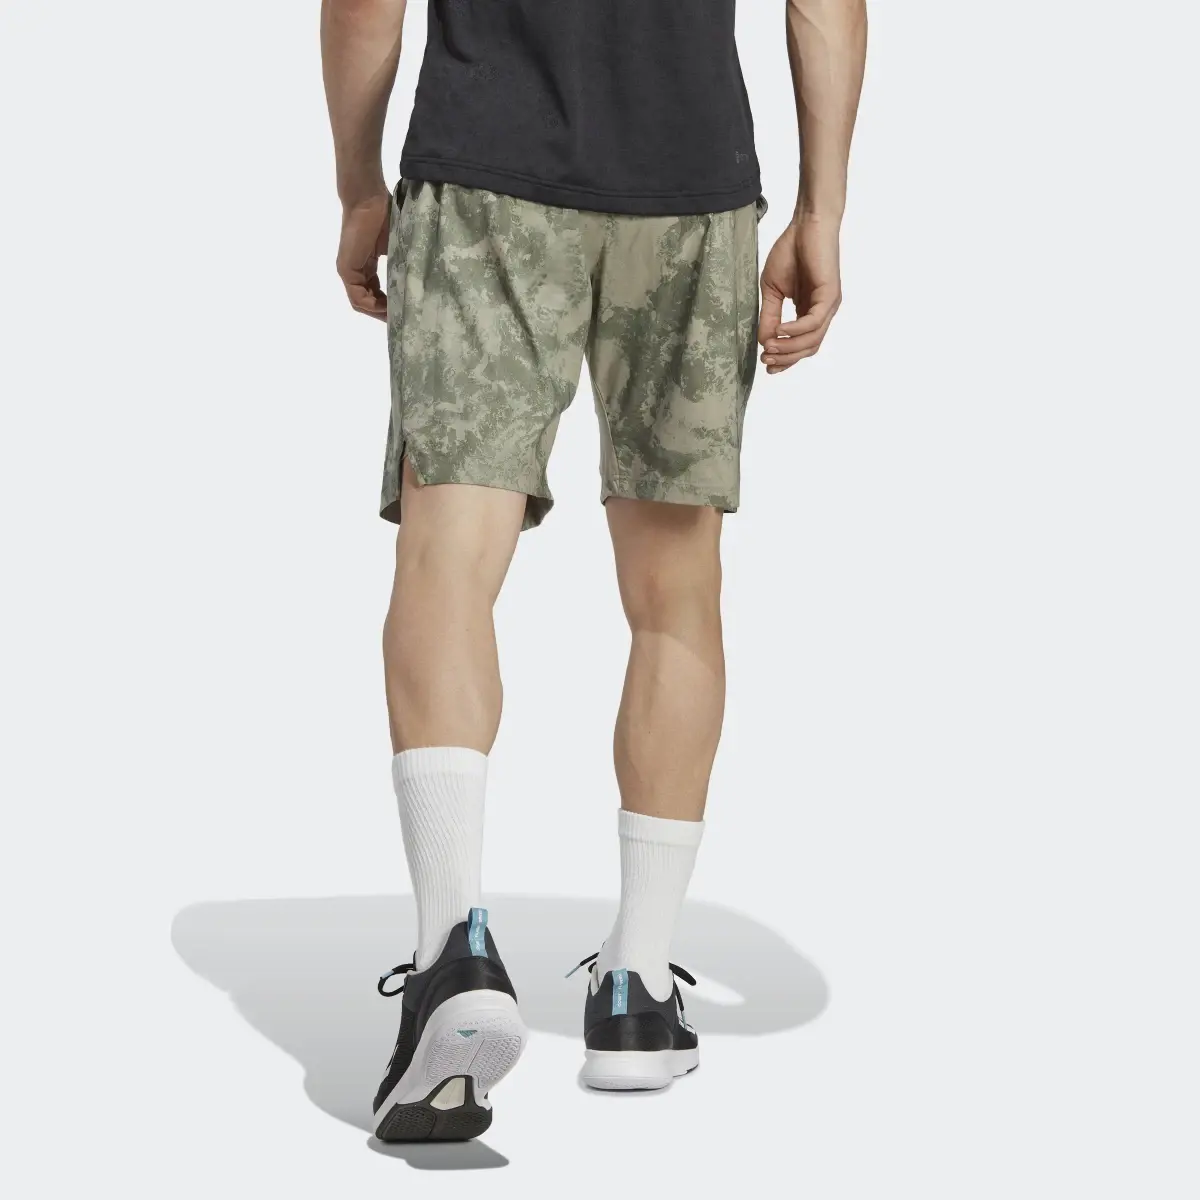 Adidas Tennis Paris HEAT.RDY Two-in-One Shorts. 2